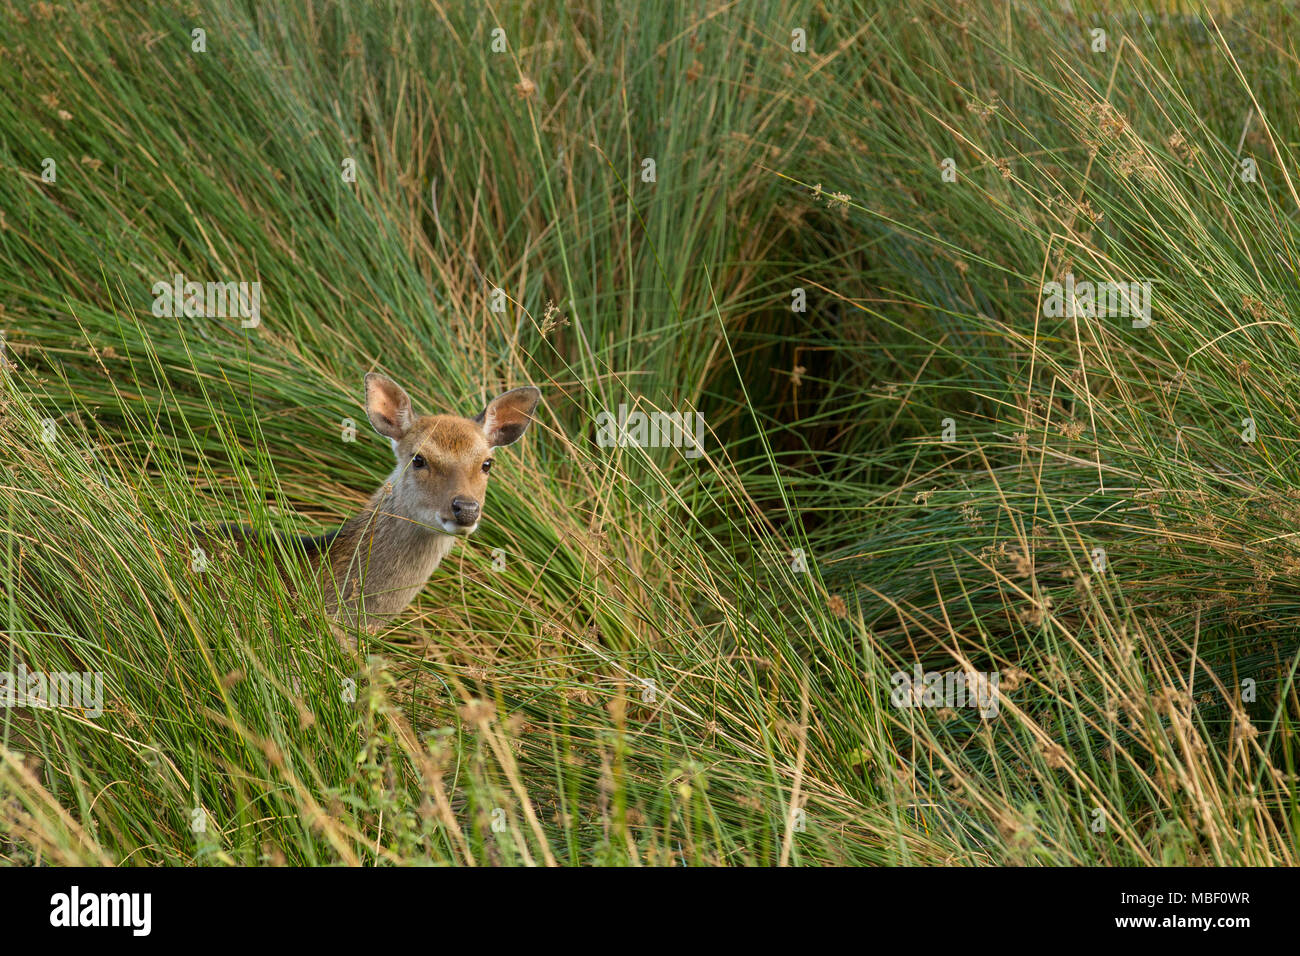 A red deer peers out of the tall grasses in Killarney National Park in Ireland Stock Photo